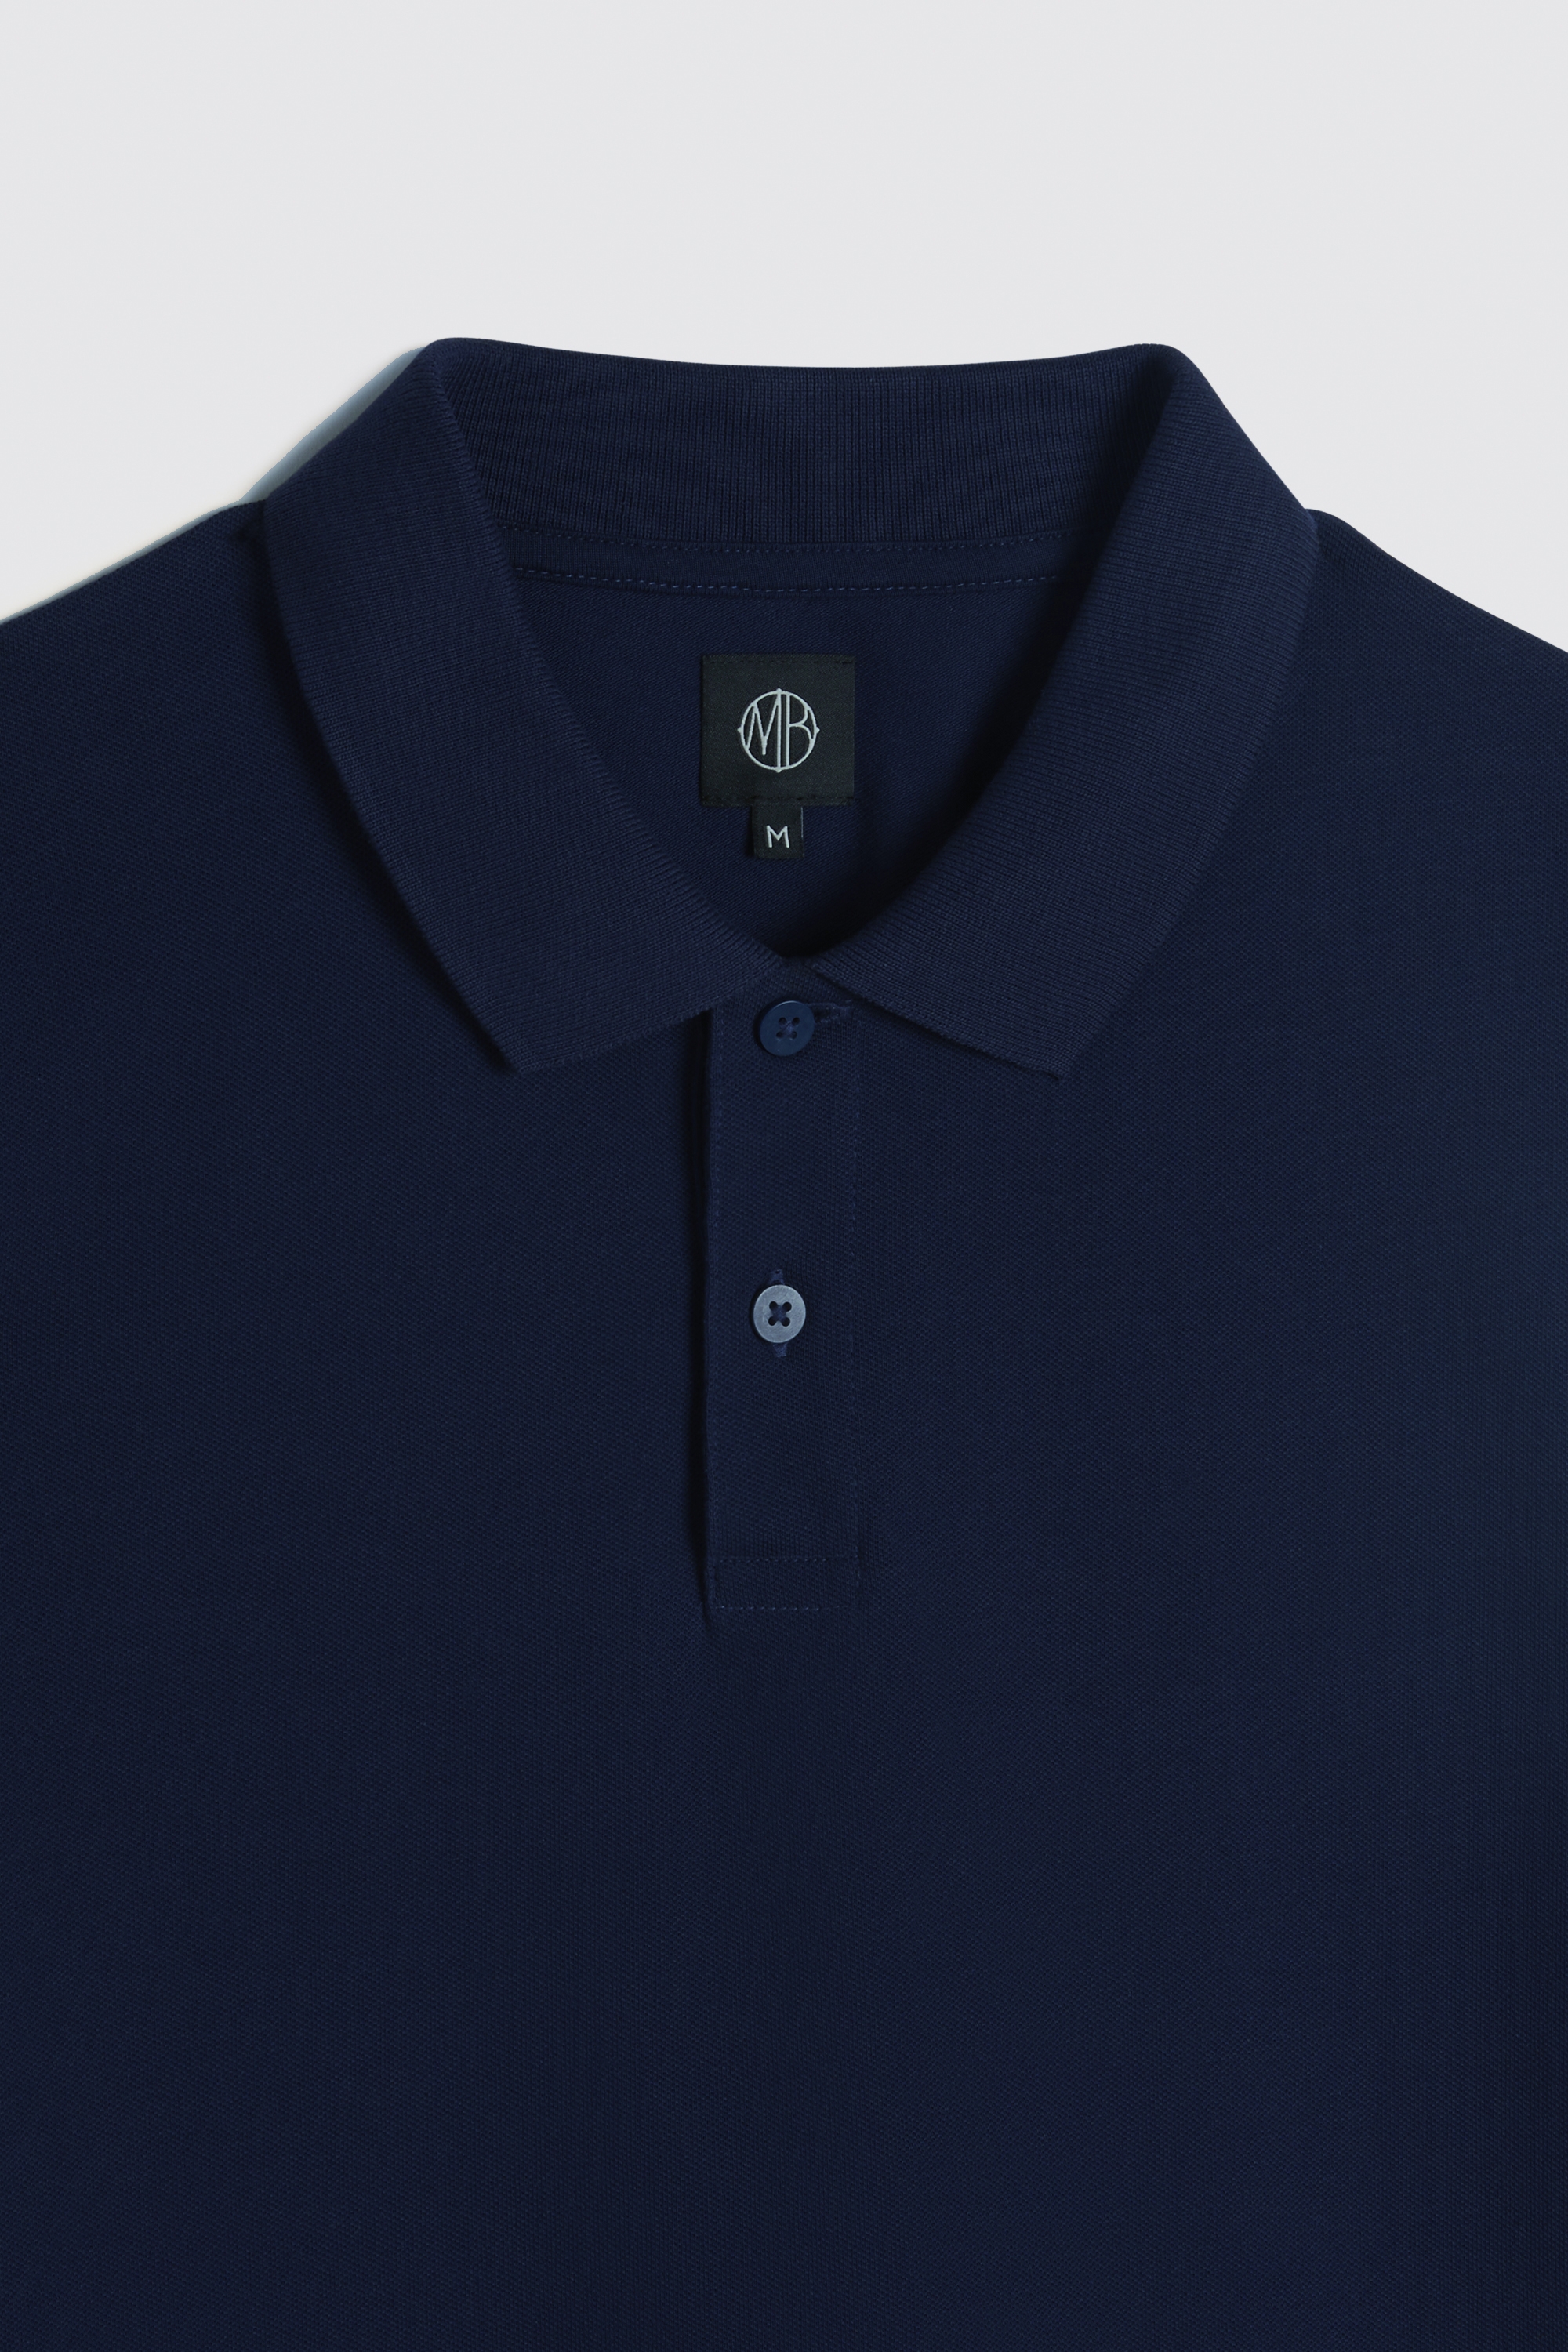 Navy Pique Polo Shirt | Buy Online at Moss